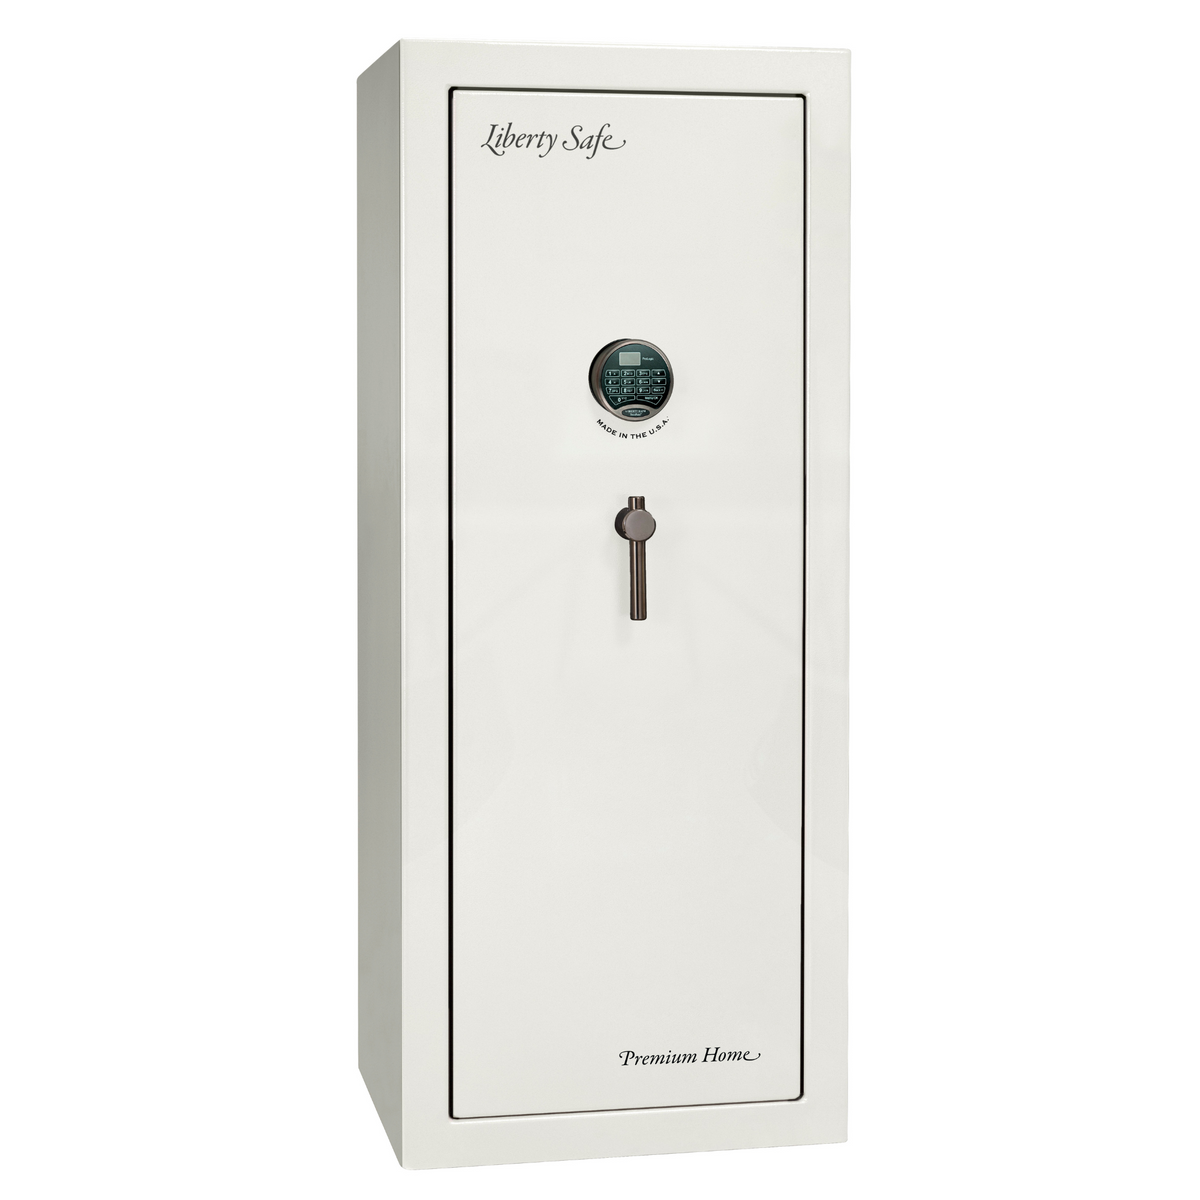 Premium Home Series | Level 7 Security | 2 Hour Fire Protection | 17 | Dimensions: 60.25&quot;(H) x 24.5&quot;(W) x 19&quot;(D) | White Marble - Closed Door